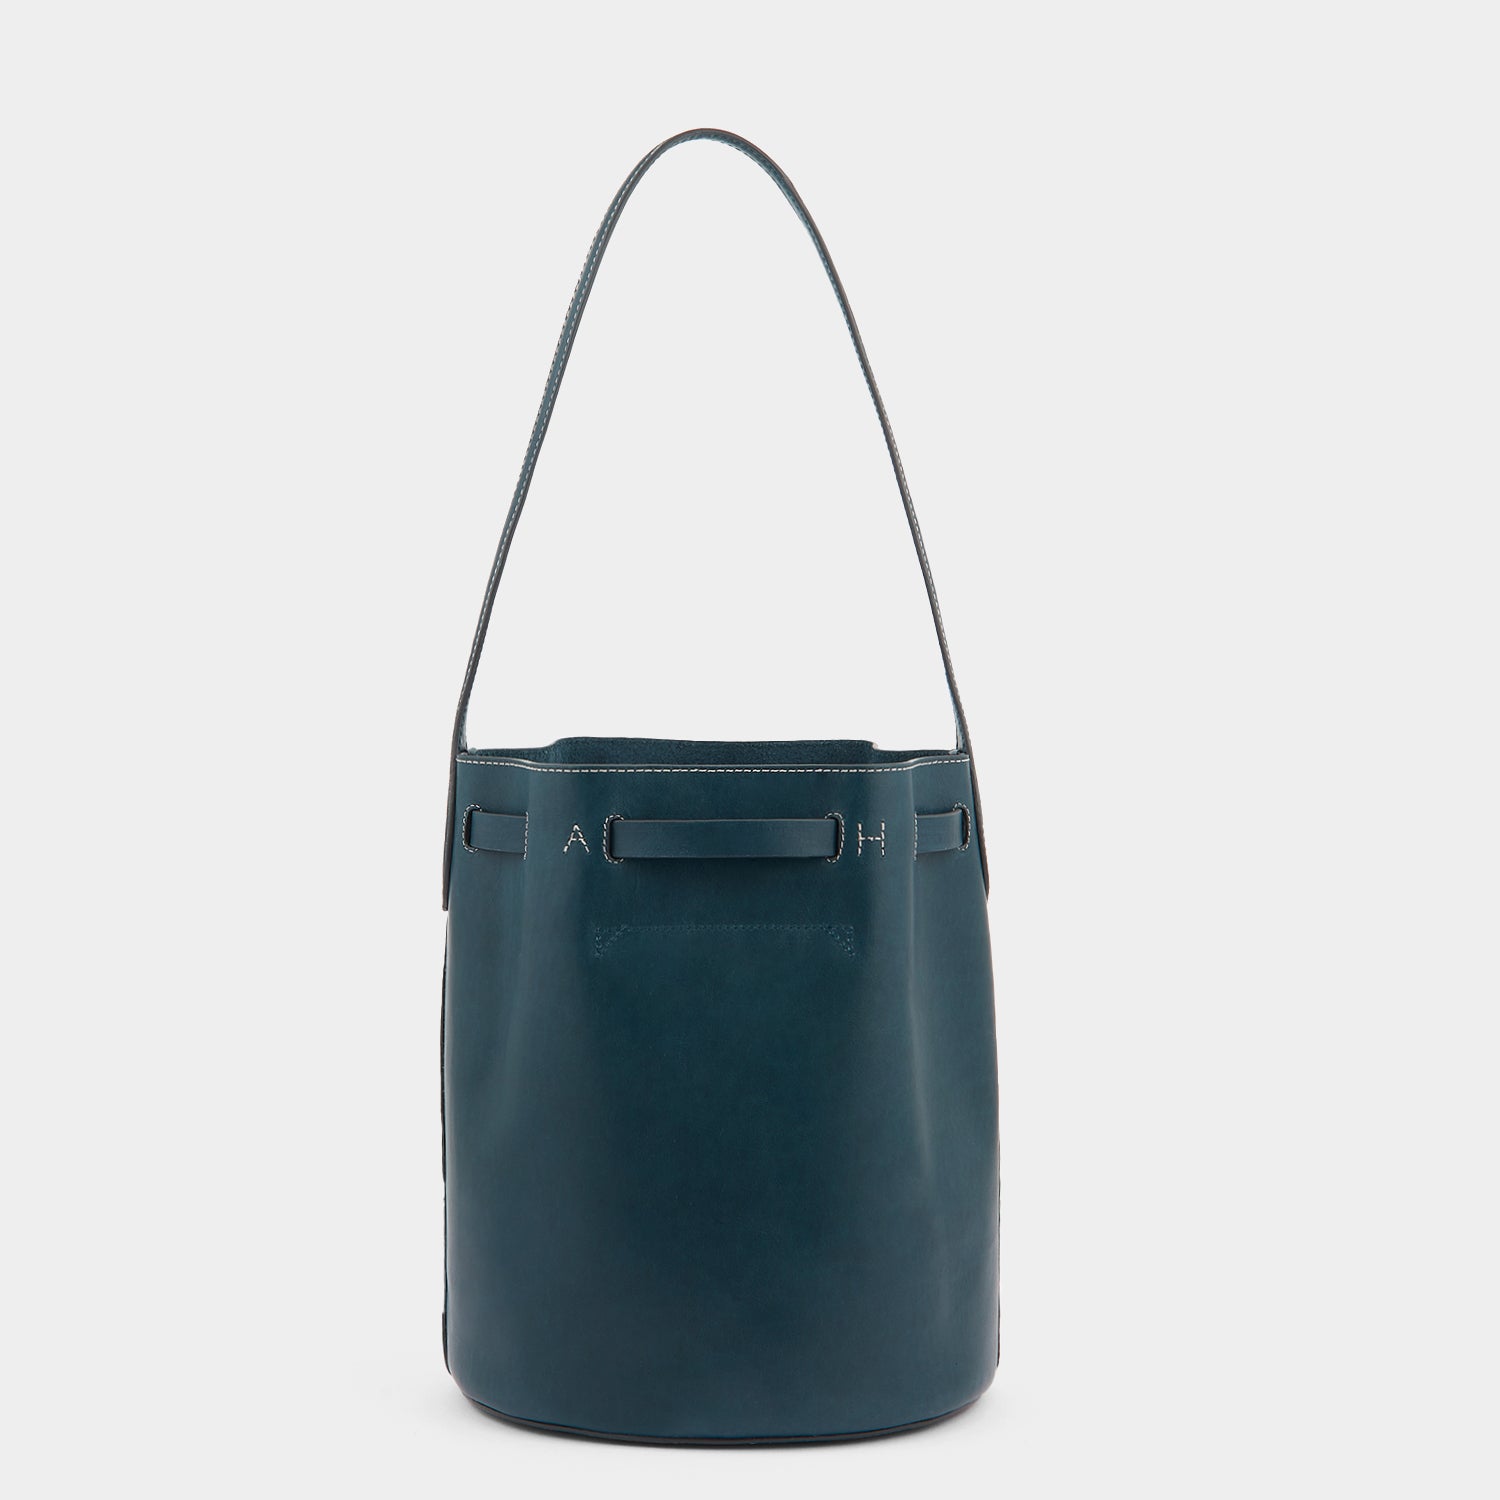 「Return to Nature」バケットバッグ スモール -

                  
                    Compostable Leather in Dark Holly -
                  

                  Anya Hindmarch JP
